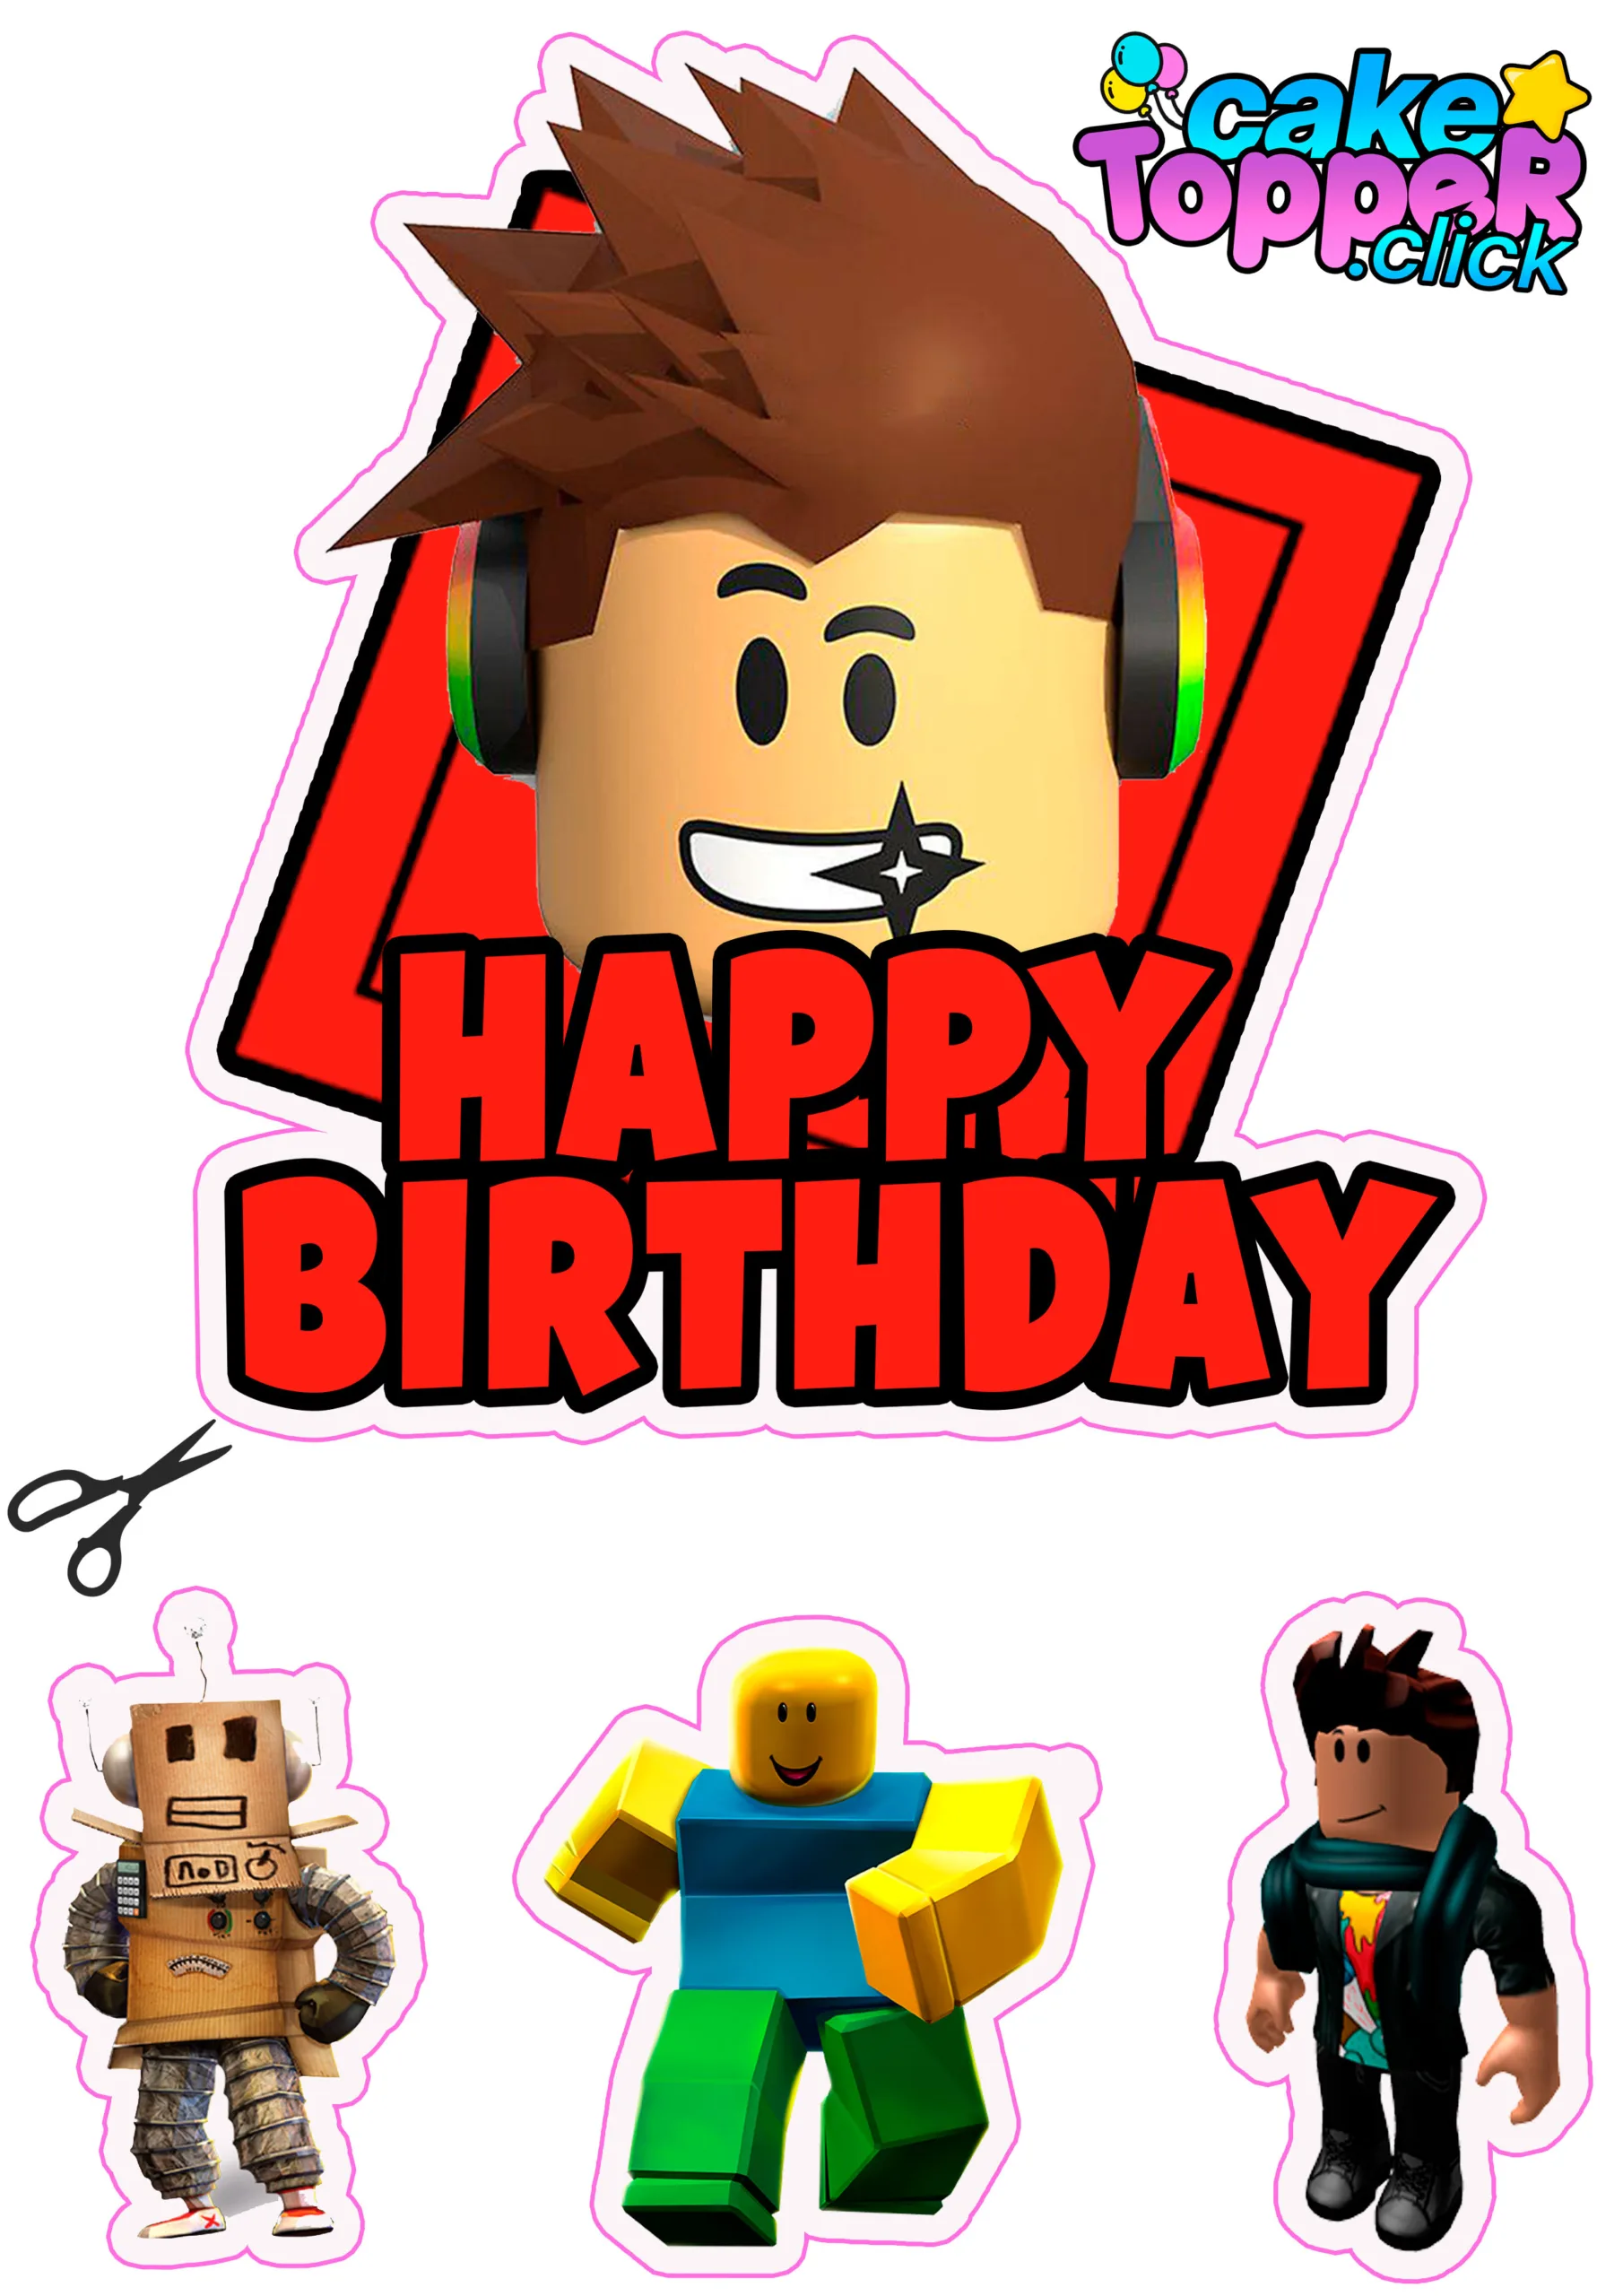 Personalised Roblox Cake Toppers | Icing/Wafer Paper | Edible Print | eBay